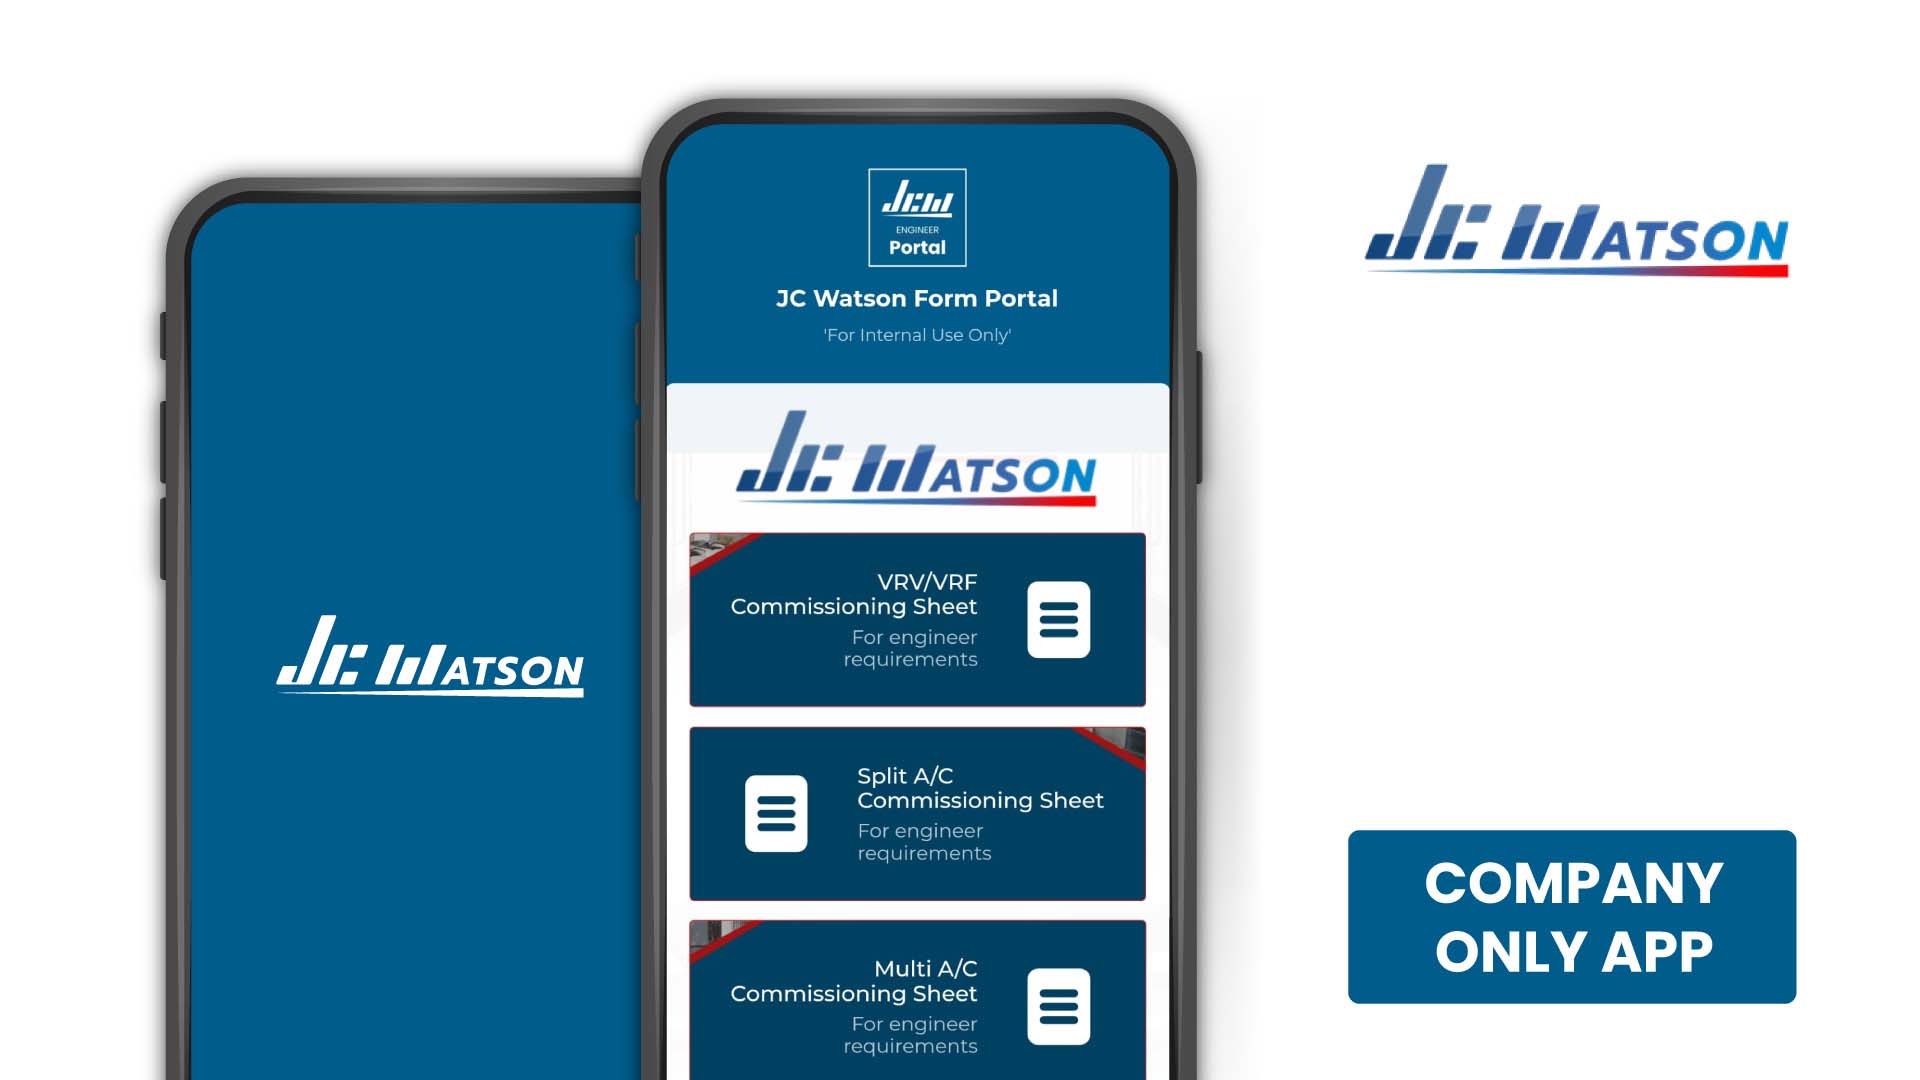 The JC Wastson App brought to you by Identity Pixel - App Design & Development in Essex